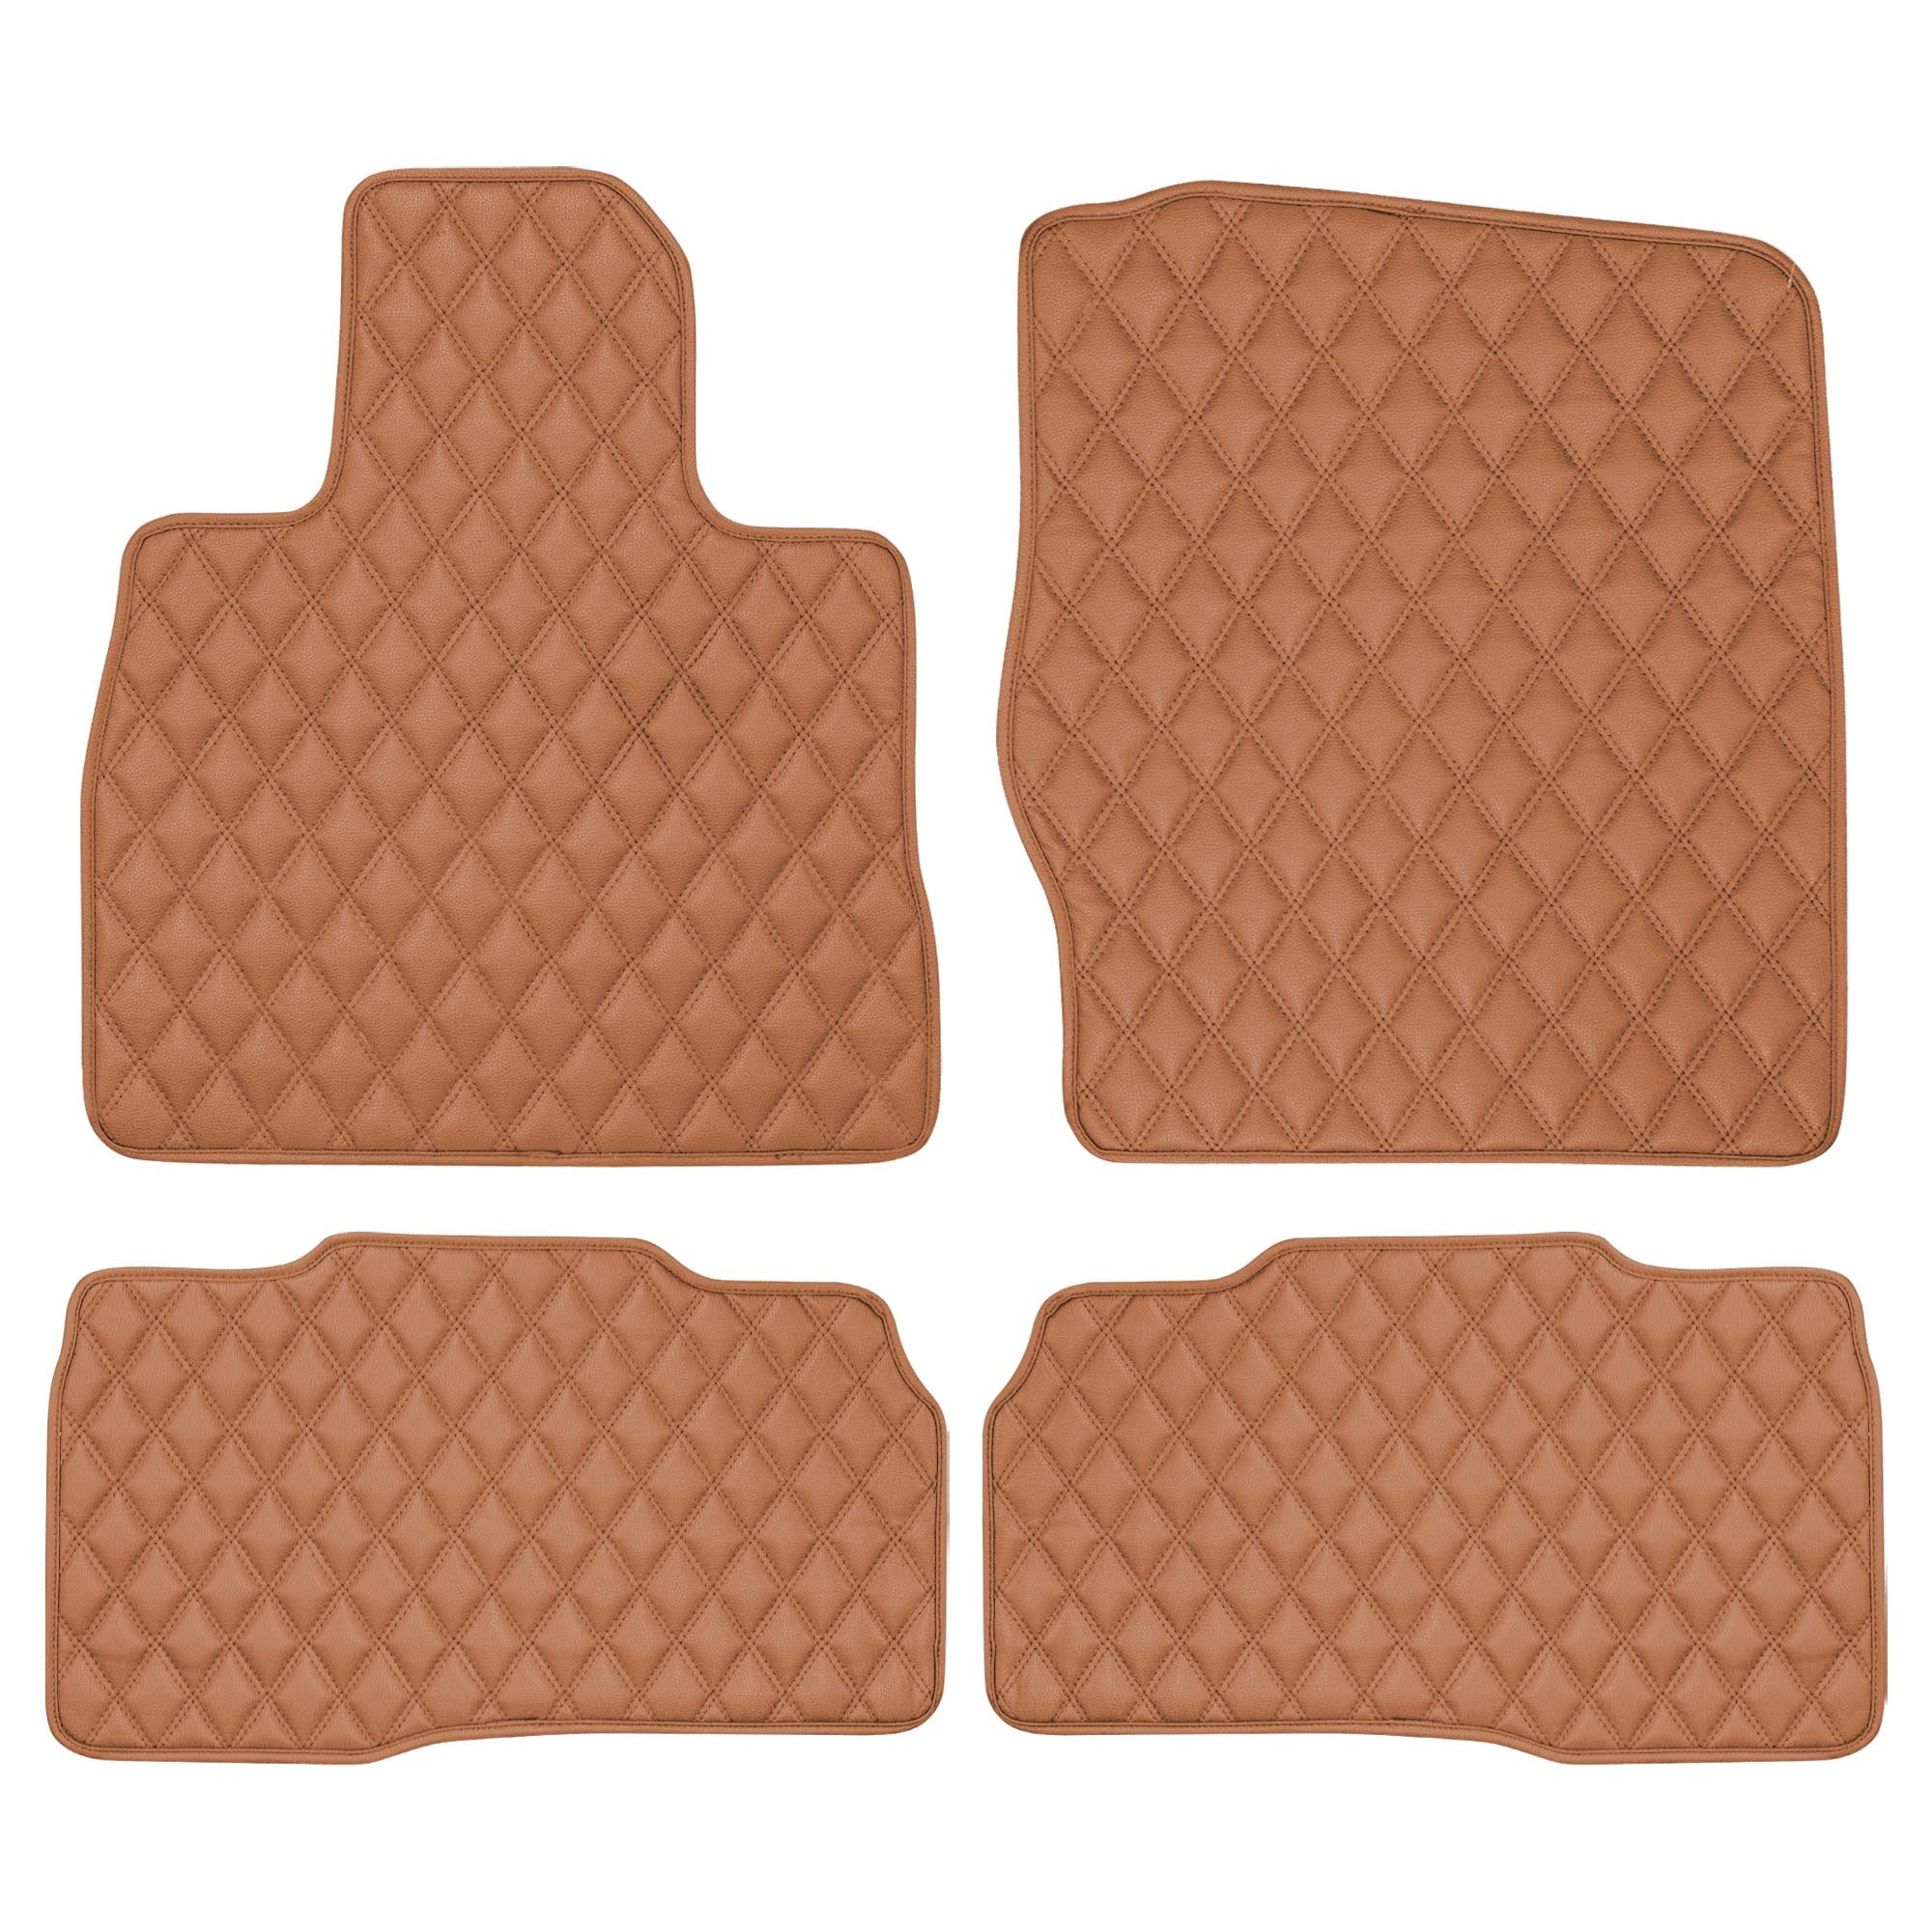 Faux Leather Custom-Fit Floor Mats for 2020-2022 Ford Explorer - Brown